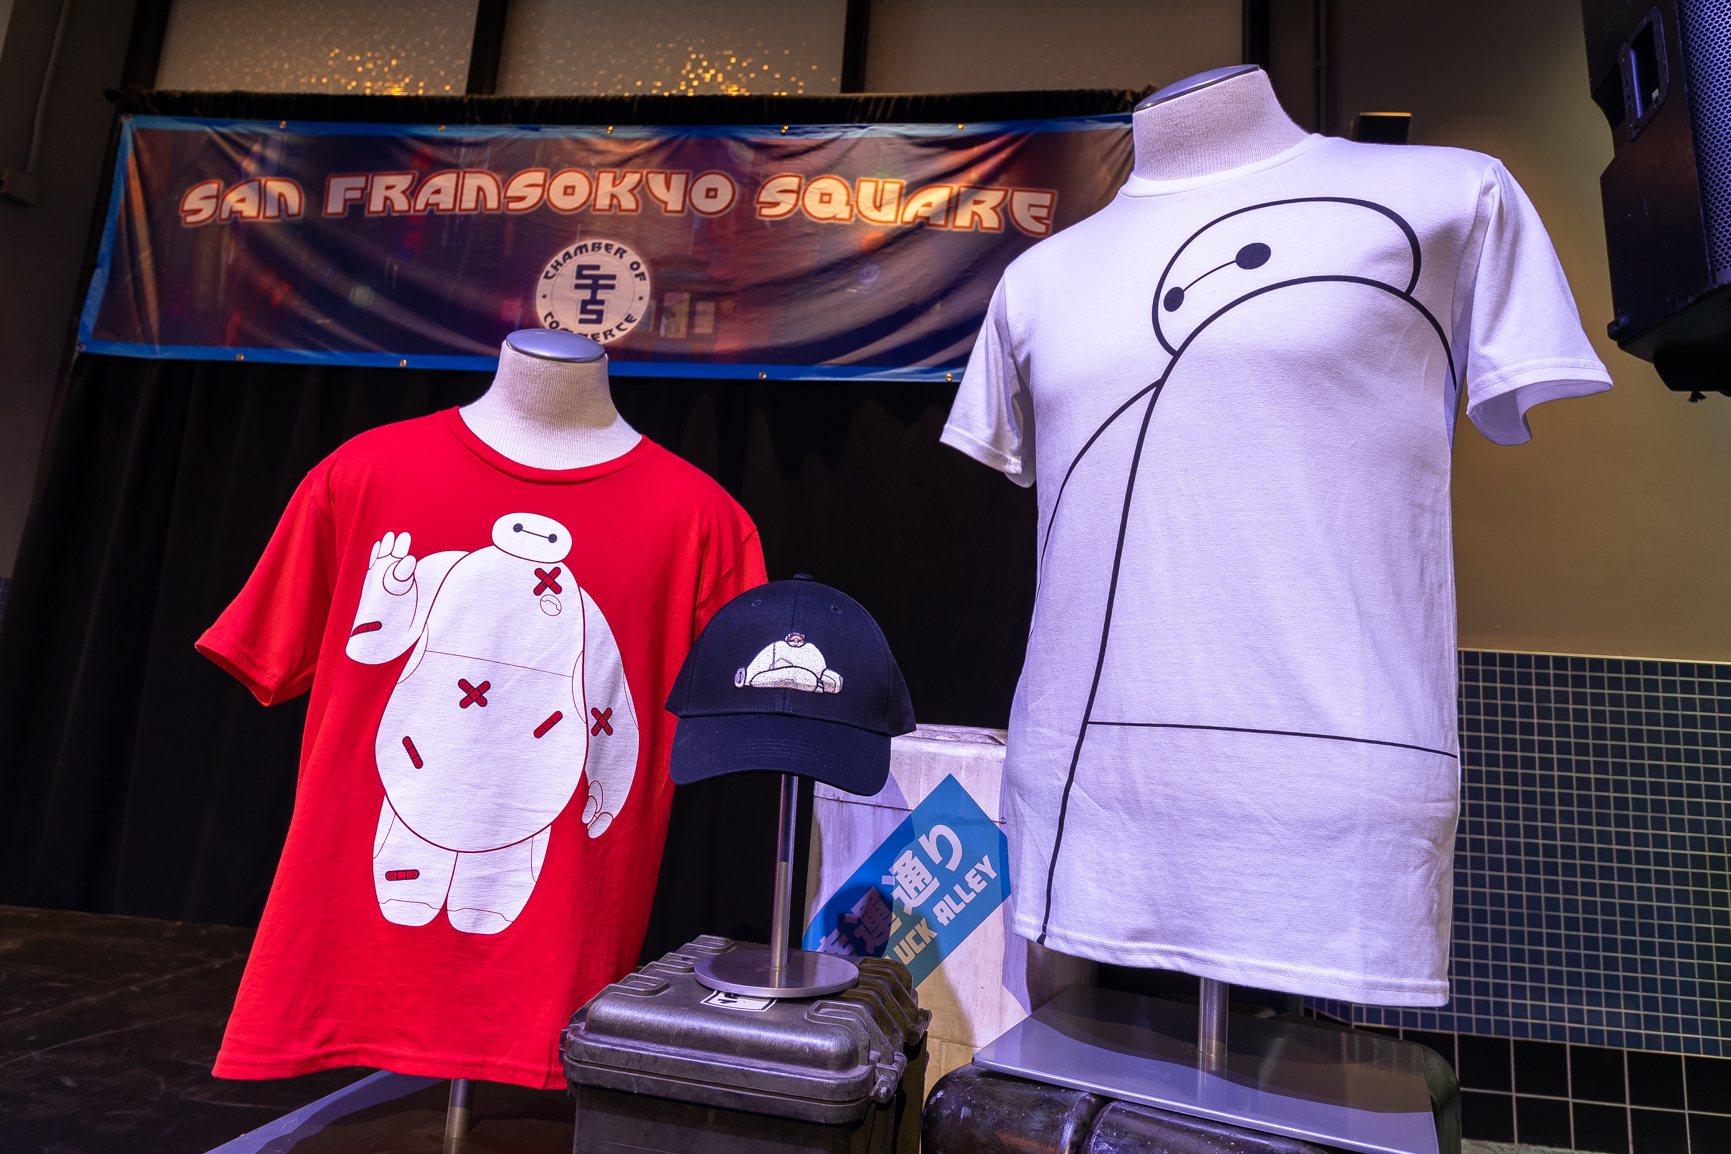 When San Fransokyo Square opens Aug. 31, 2023, three new merchandise items will debut at the San Fransokyo Maker’s Market – a storefront stocked with unique apparel, homewares and more featuring Baymax and friends. (Christian Thompson/Disneyland Resort) 